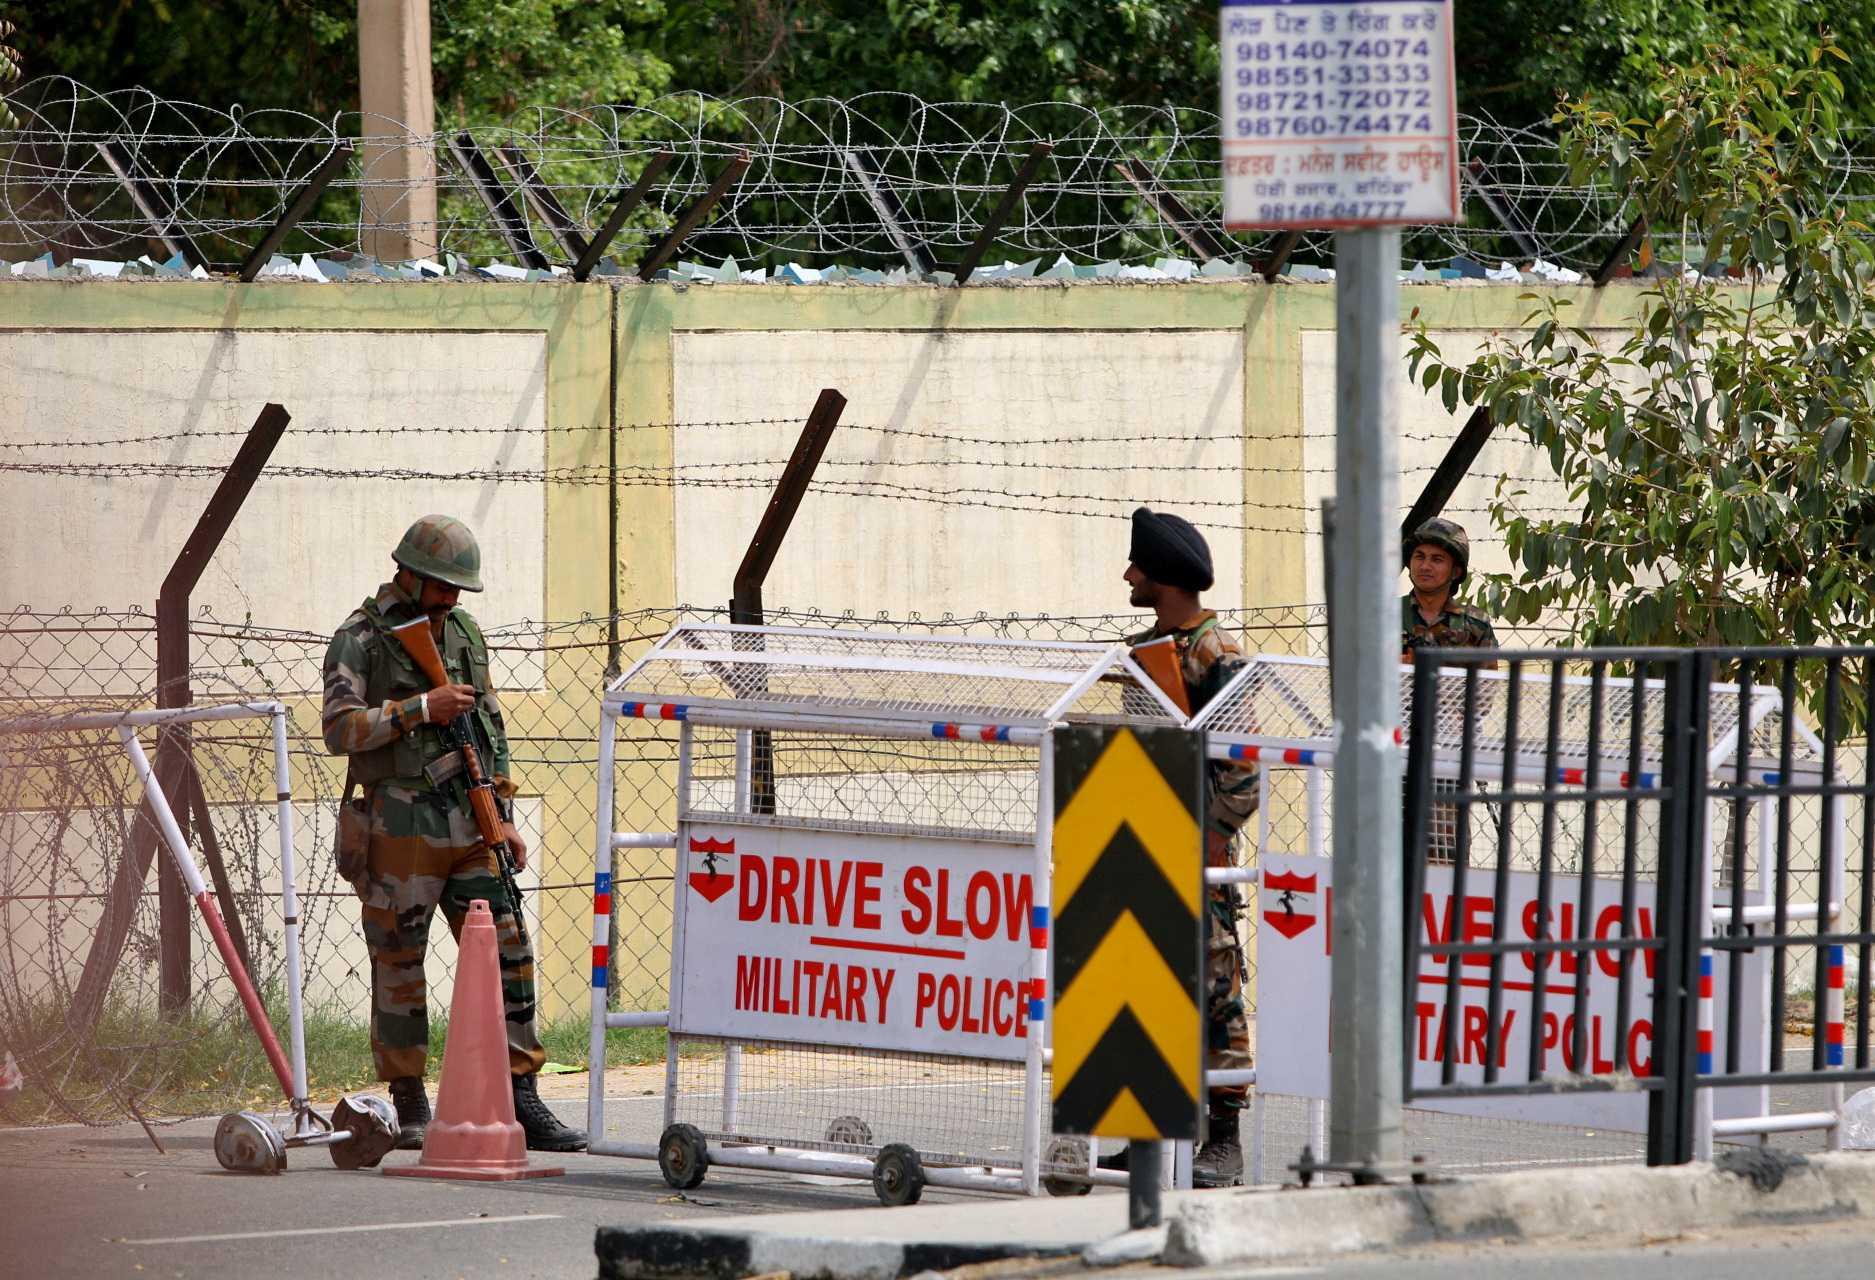 Indian army soldiers stand next to a barricade outside a military base, after a firing incident in Bathinda, India, April 12. Photo: Reuters